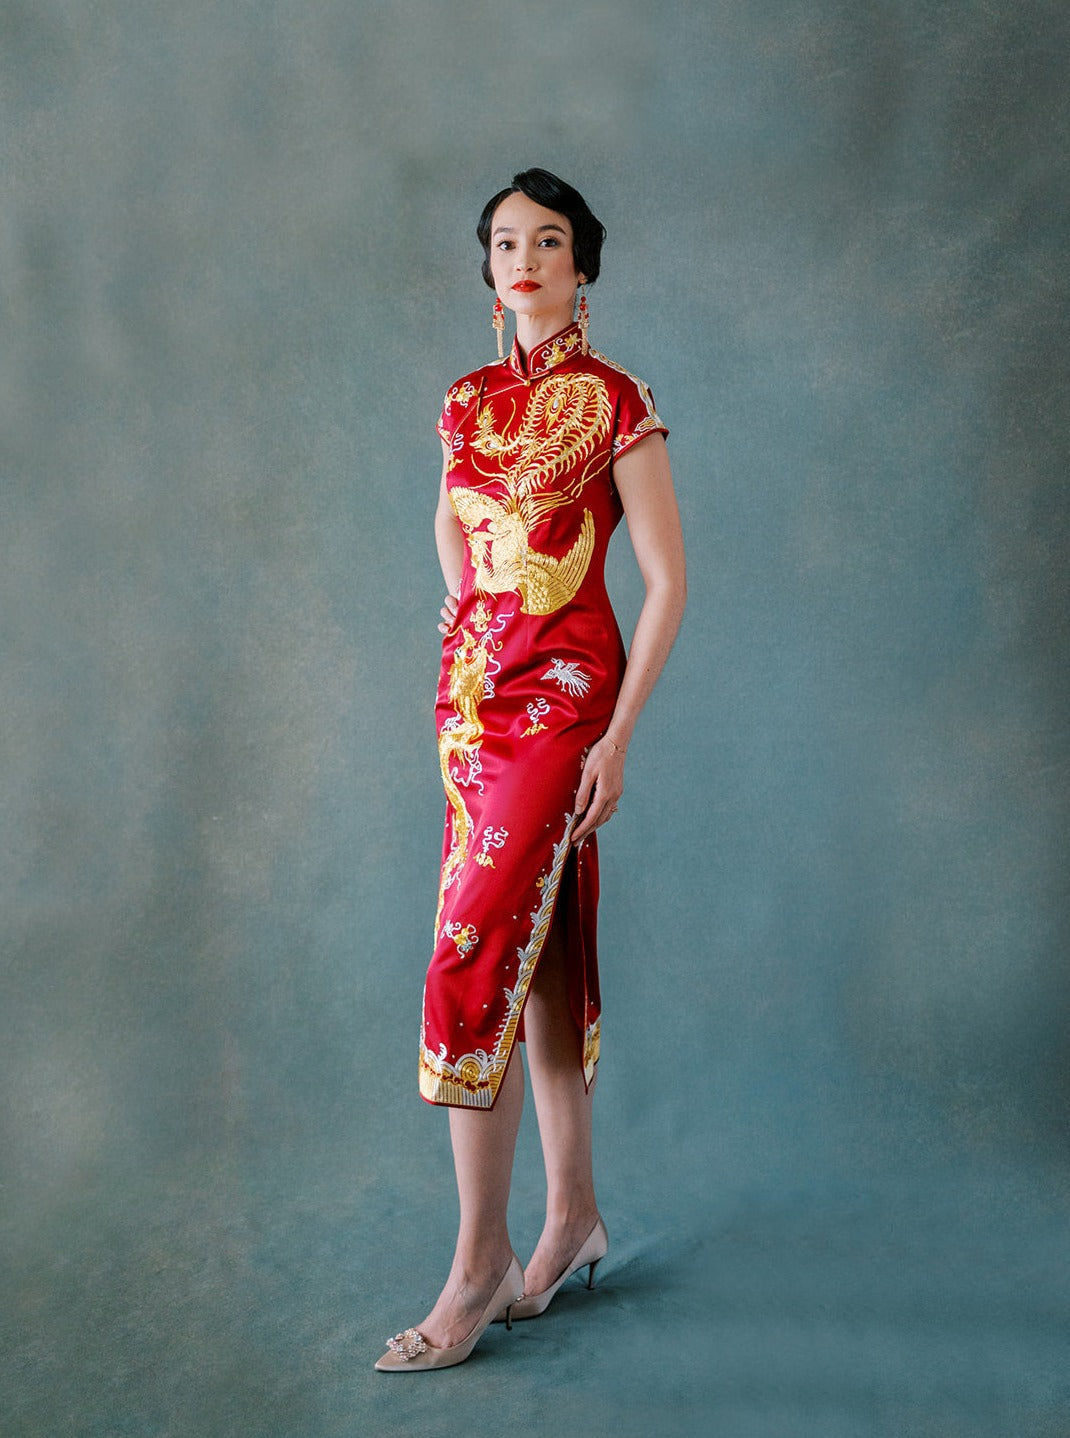 Introduction to the Qipao